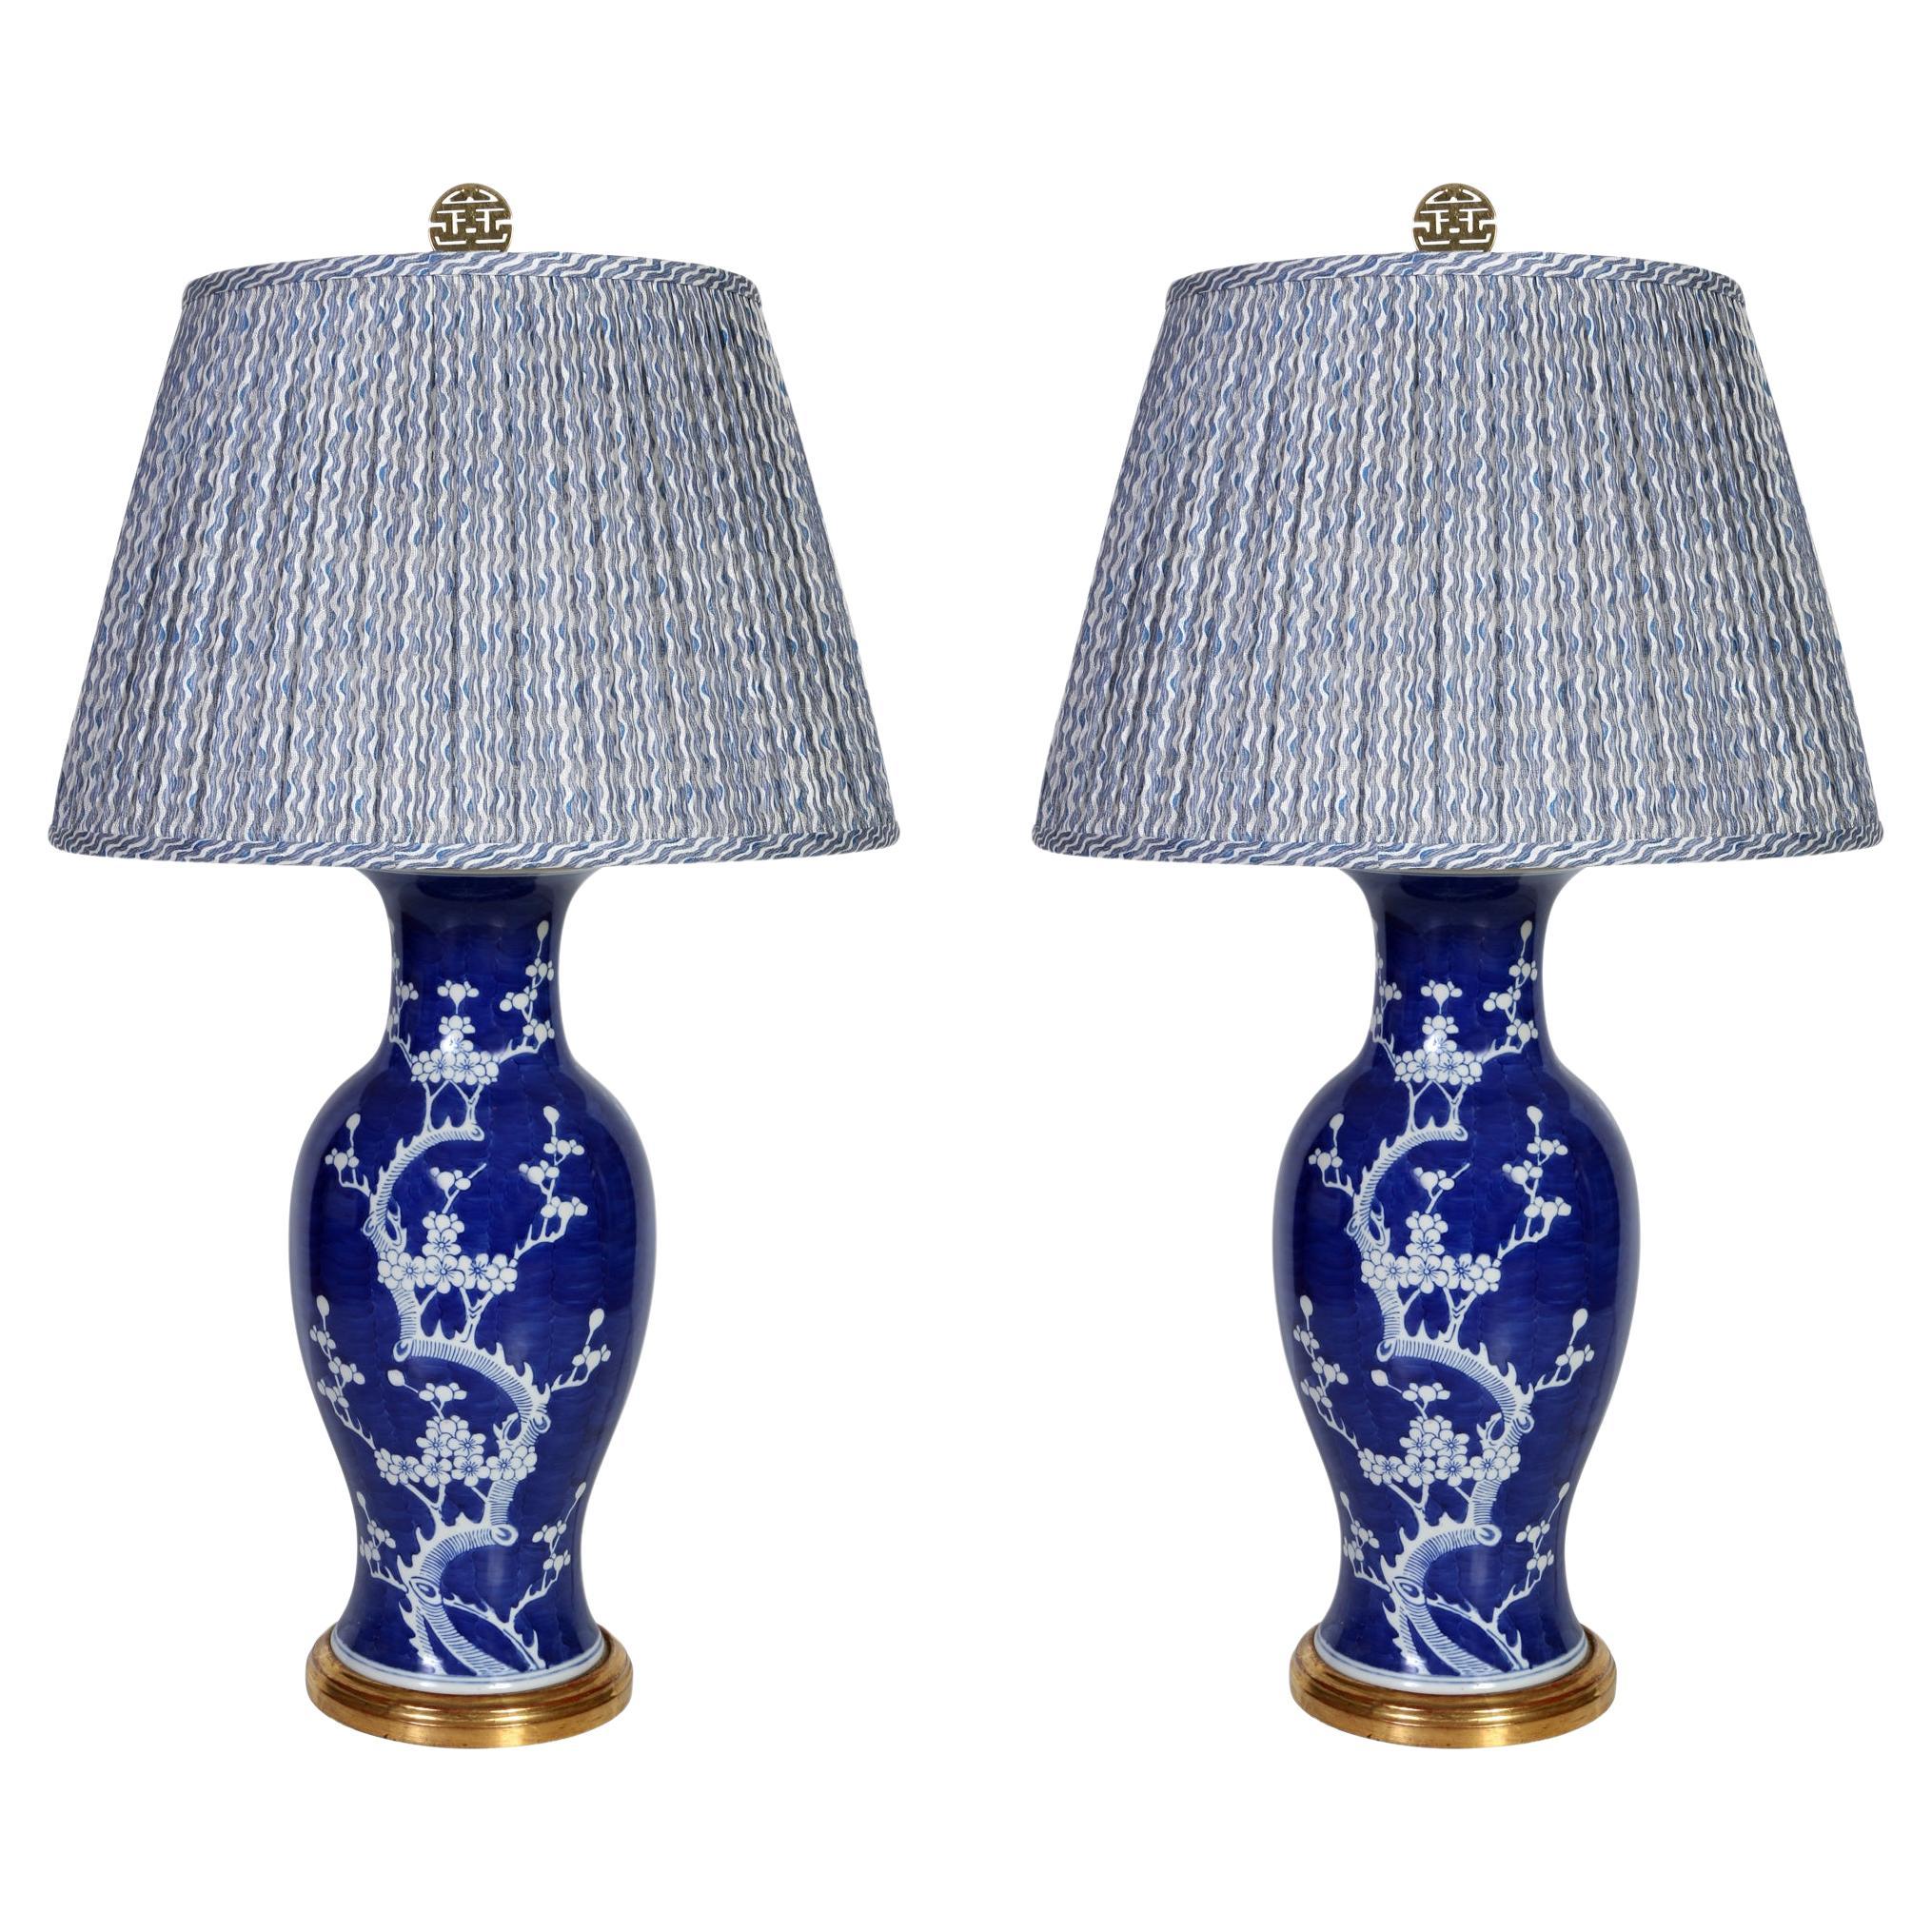 Pair of Blue Chinese Export Lamps on 18kt Gilt Base